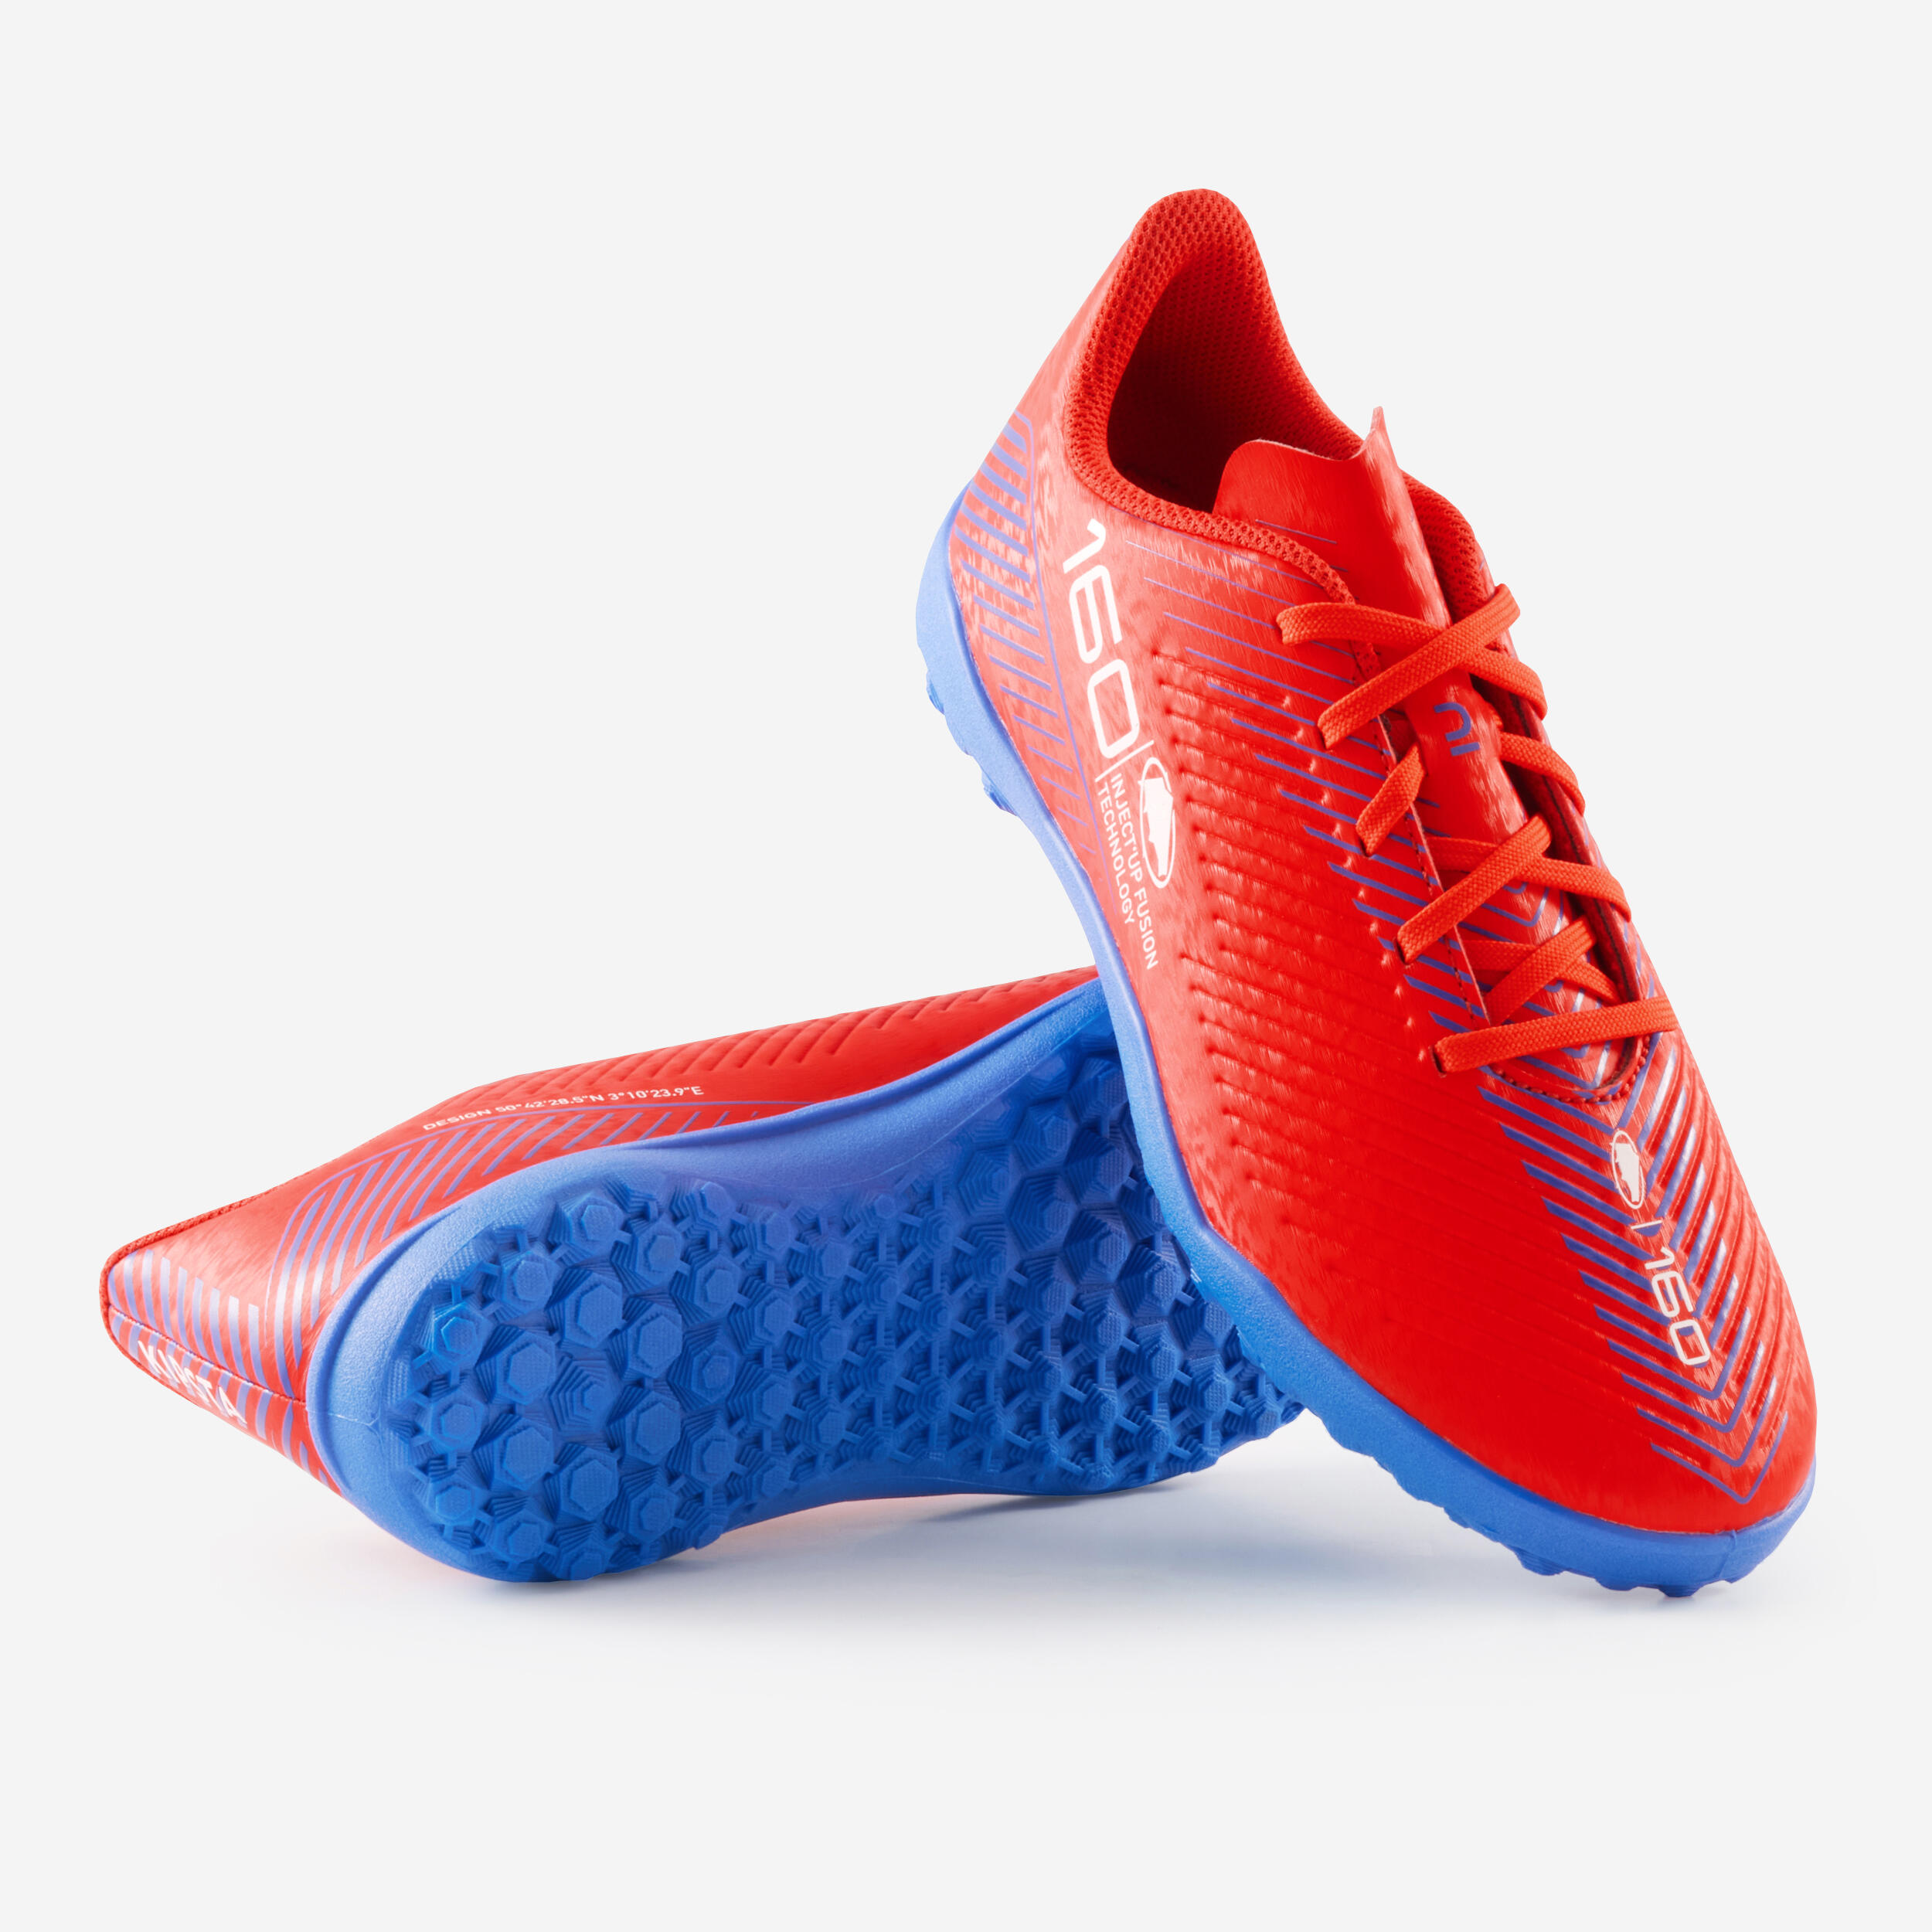 Kids' Lace-Up Football Boots 160 Turf - Red 10/10